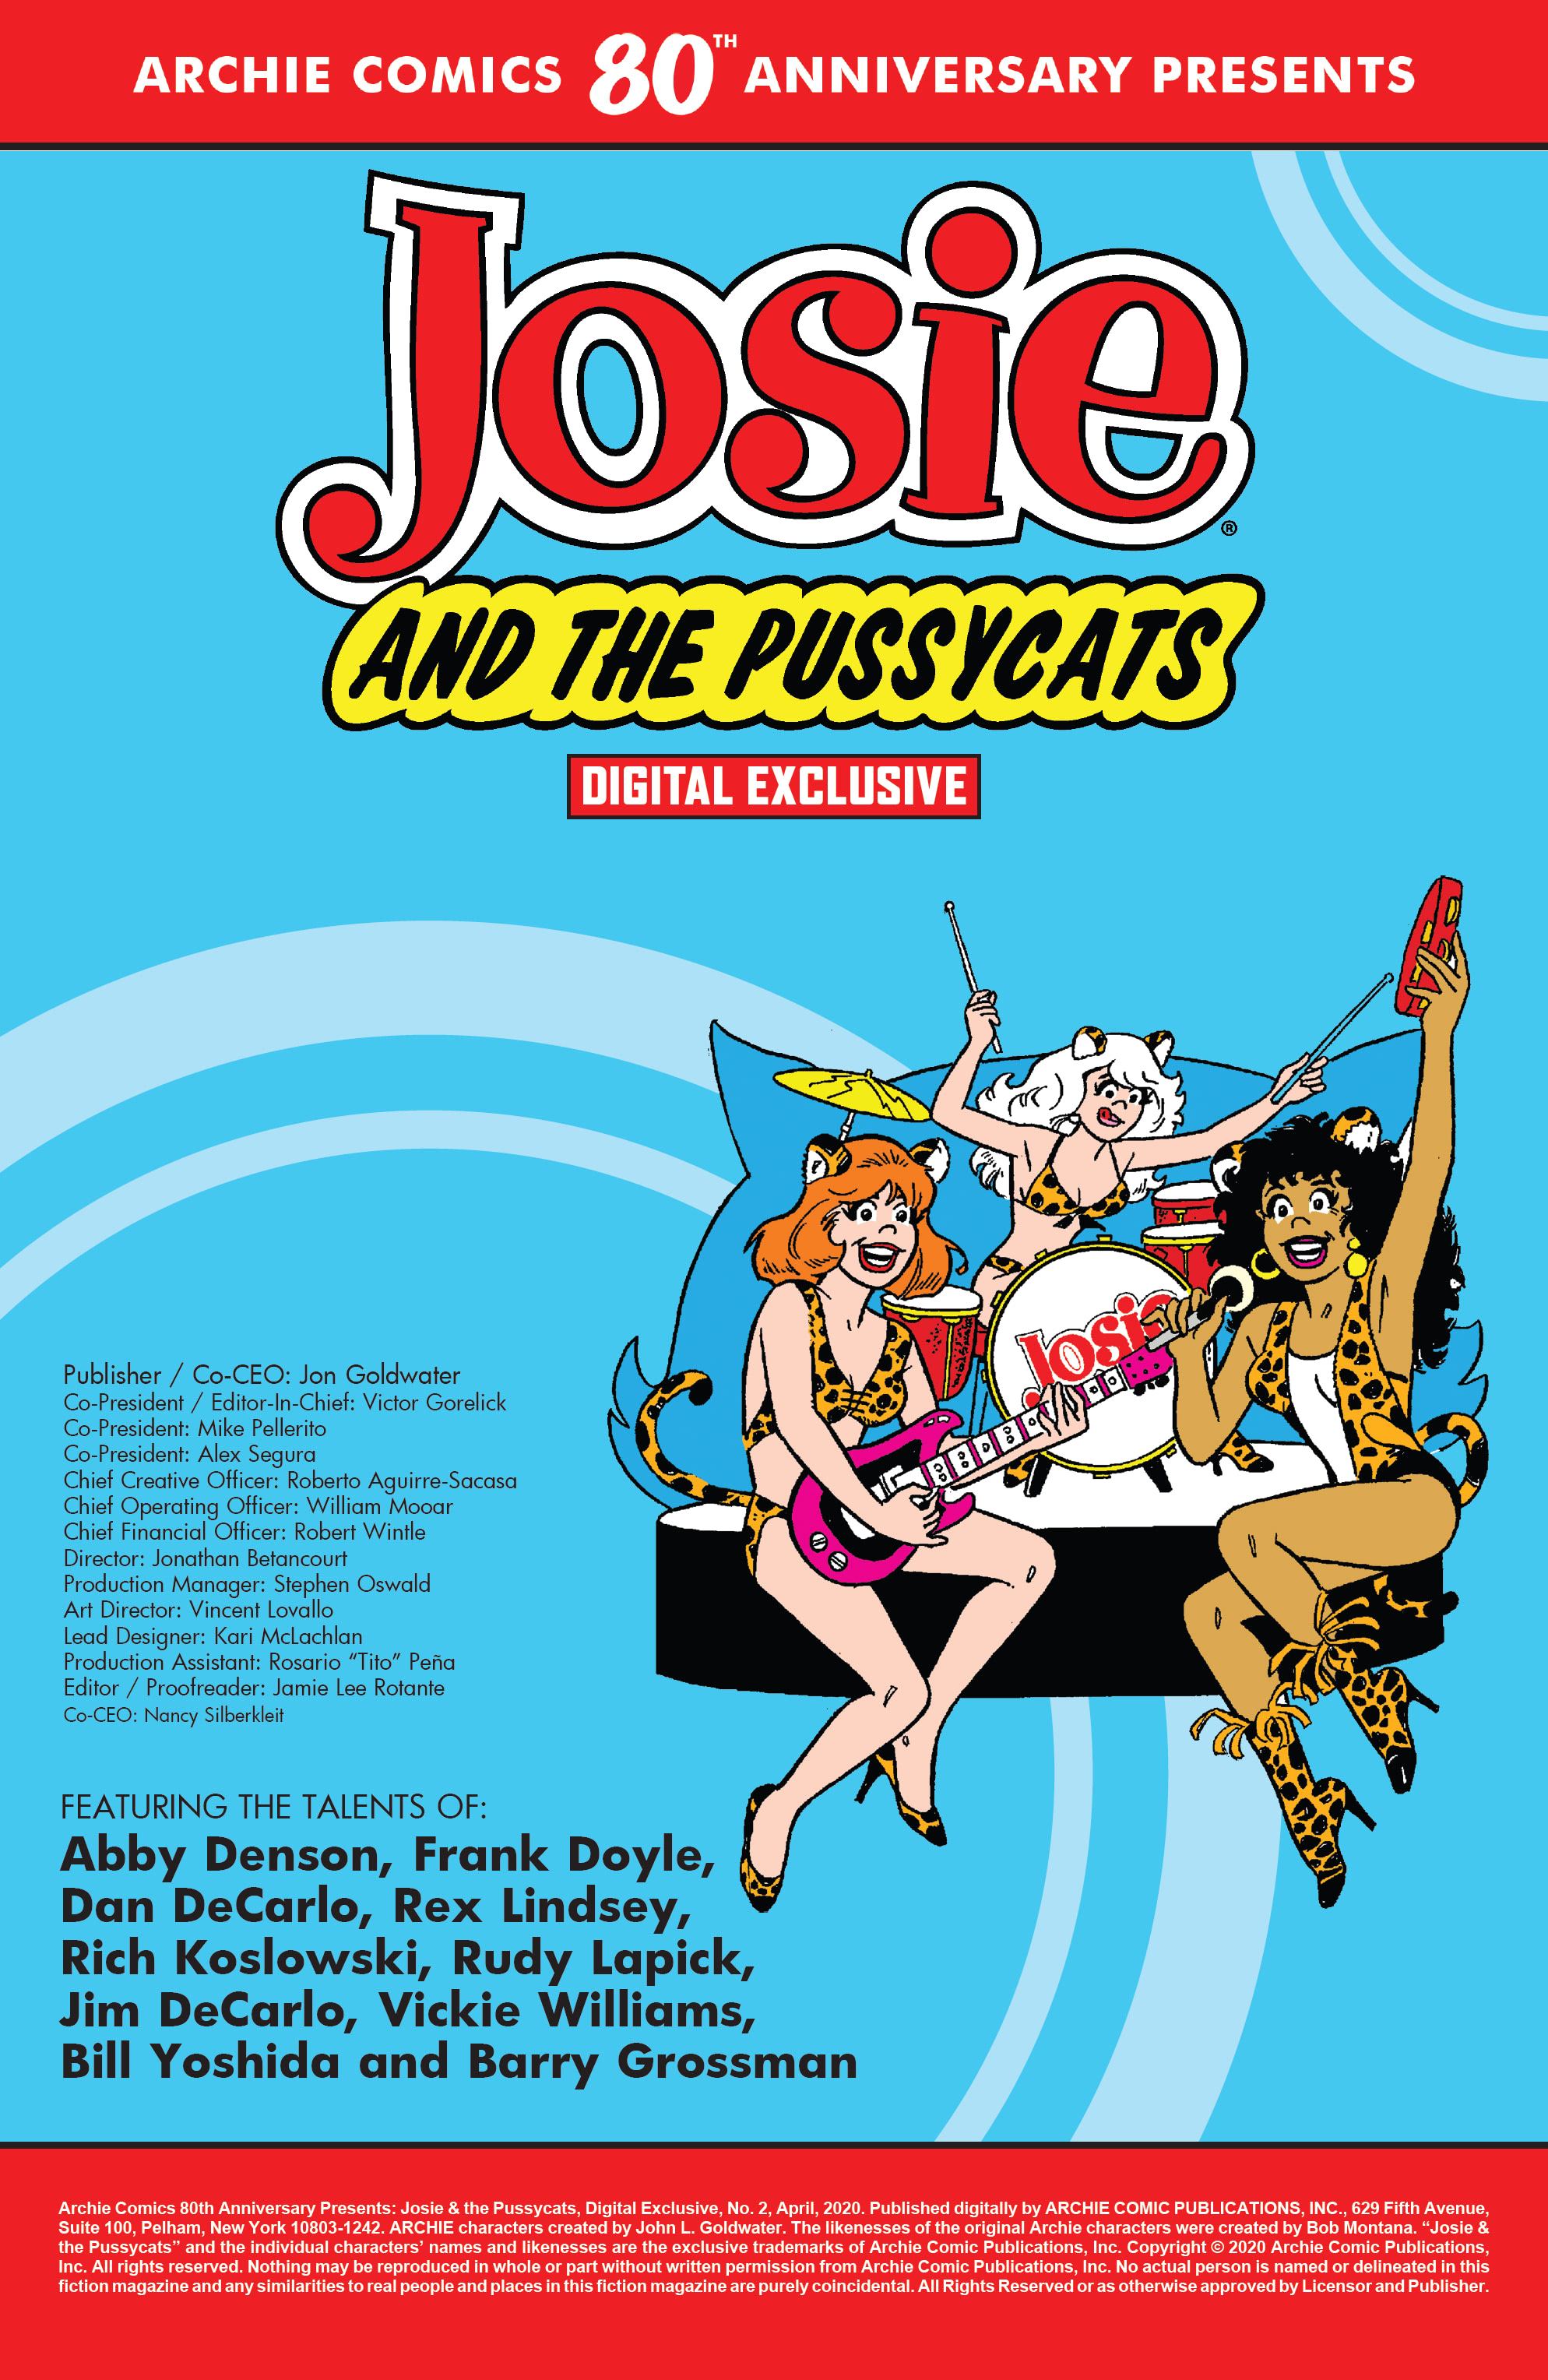 Read online Archie Comics 80th Anniversary Presents comic -  Issue #2 - 2